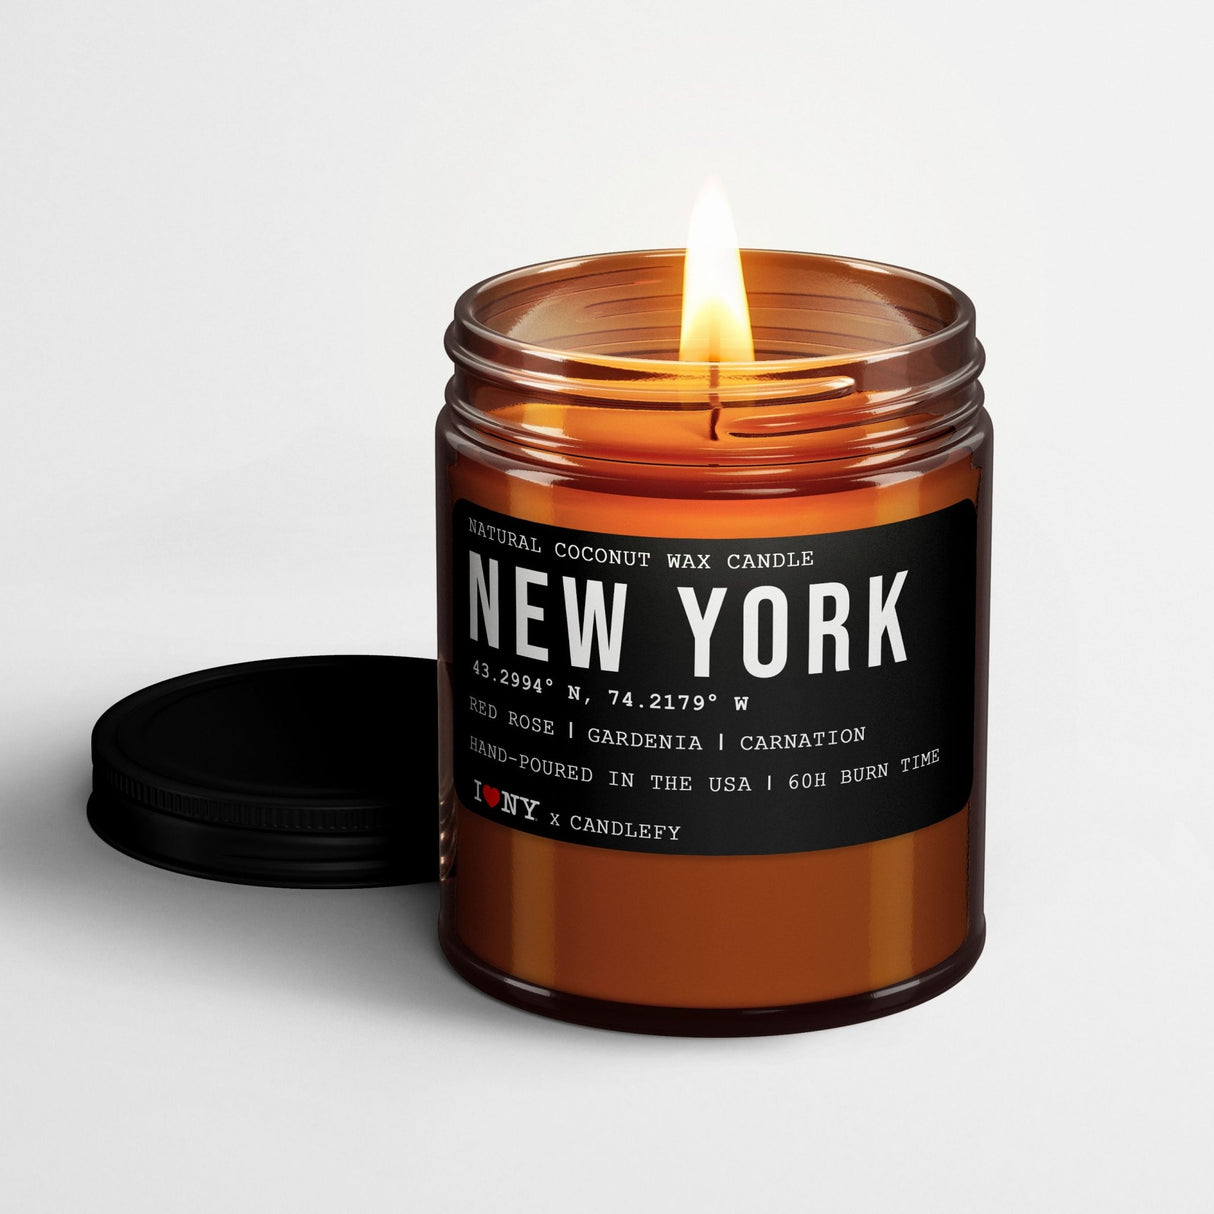 New York Scented Candle (Rose, Gardenia, Carnation) - Candlefy